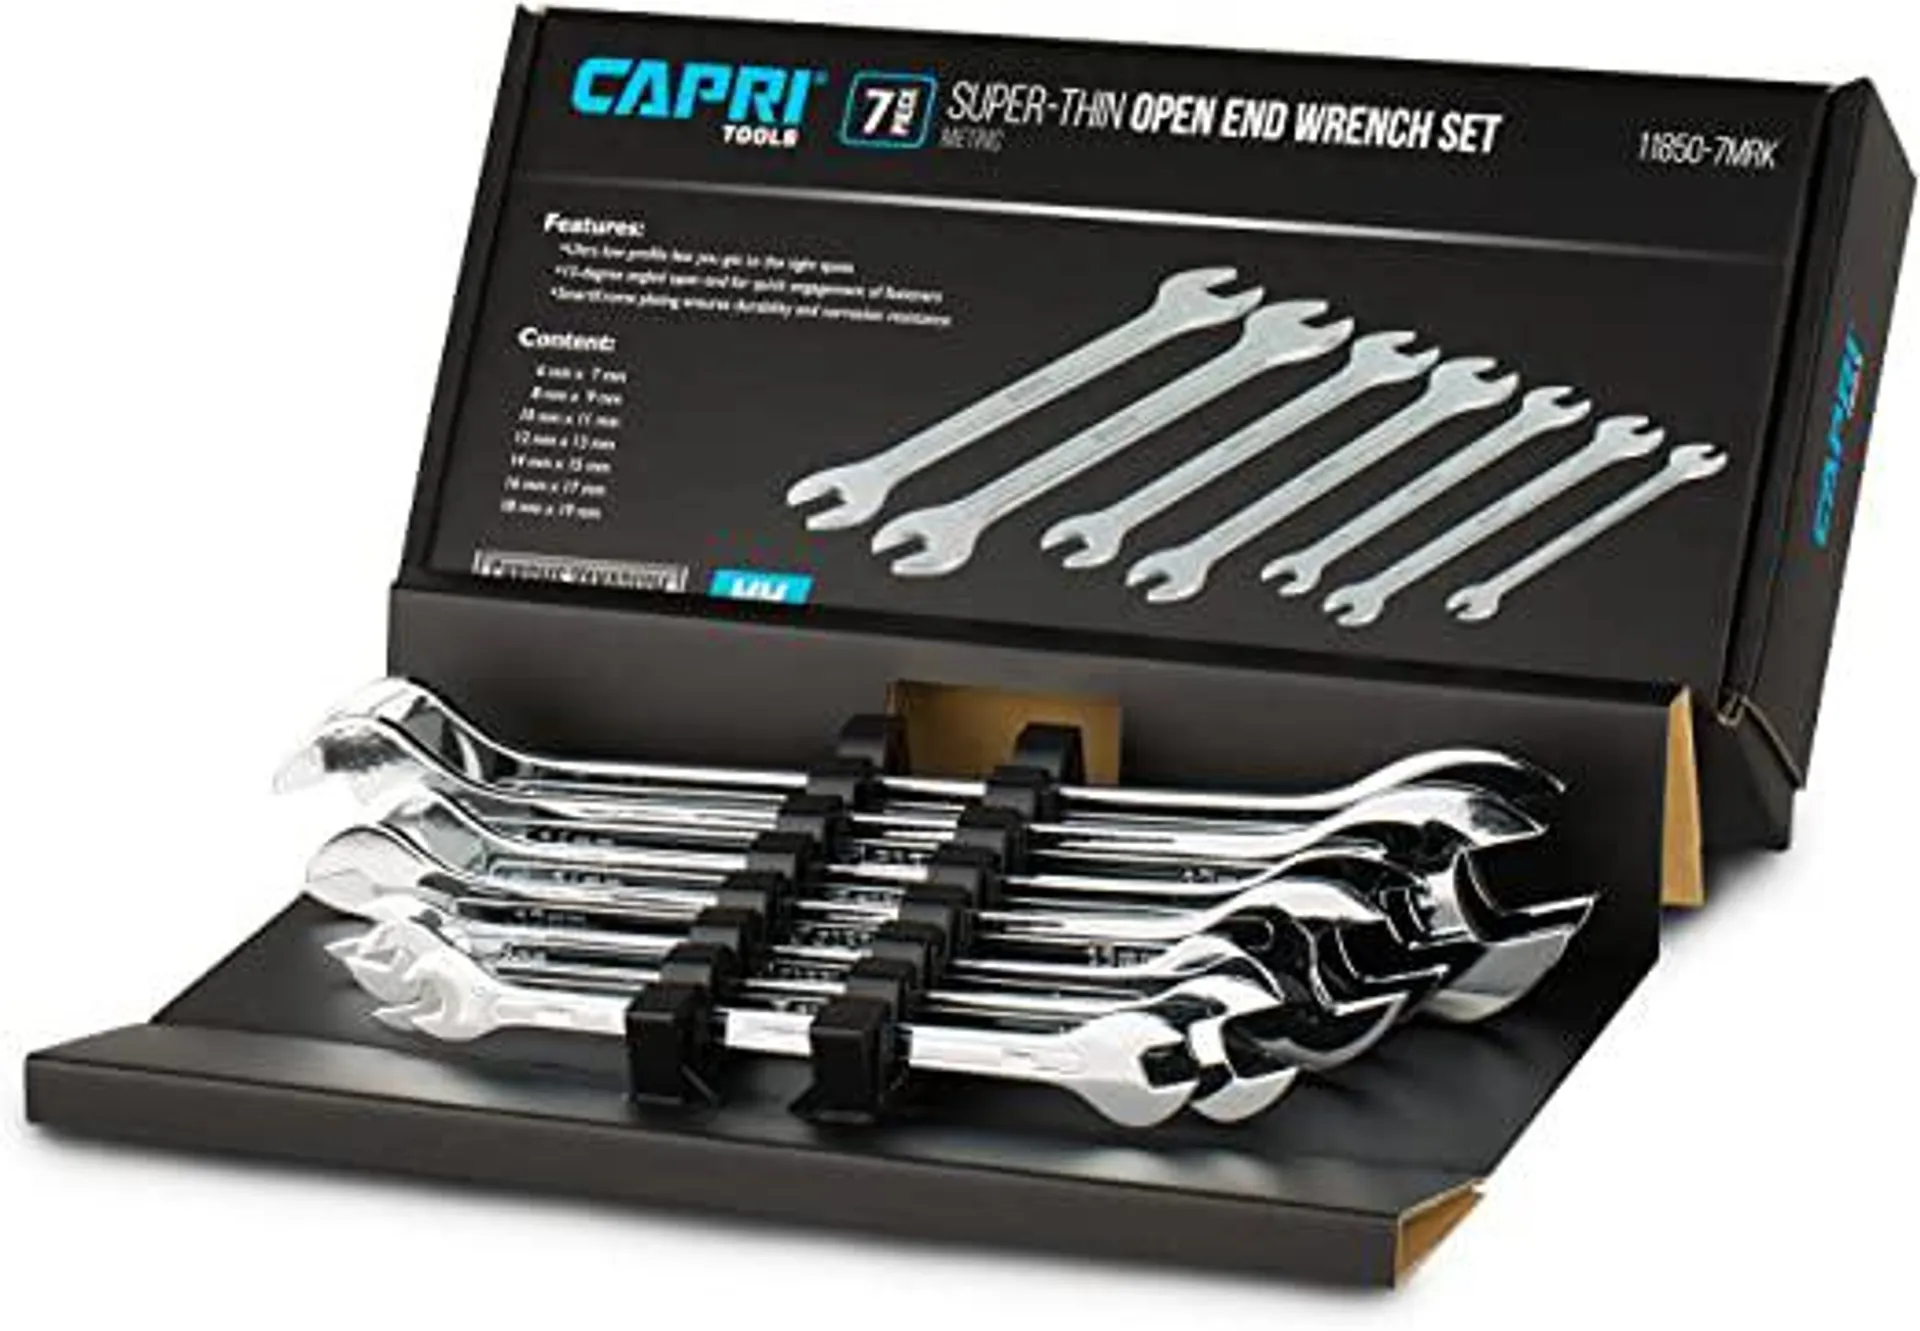 Capri Tools Super-Thin Open End Wrench Set, Metric, 6 to 19 mm, 7-Piece (11850-7MRK)